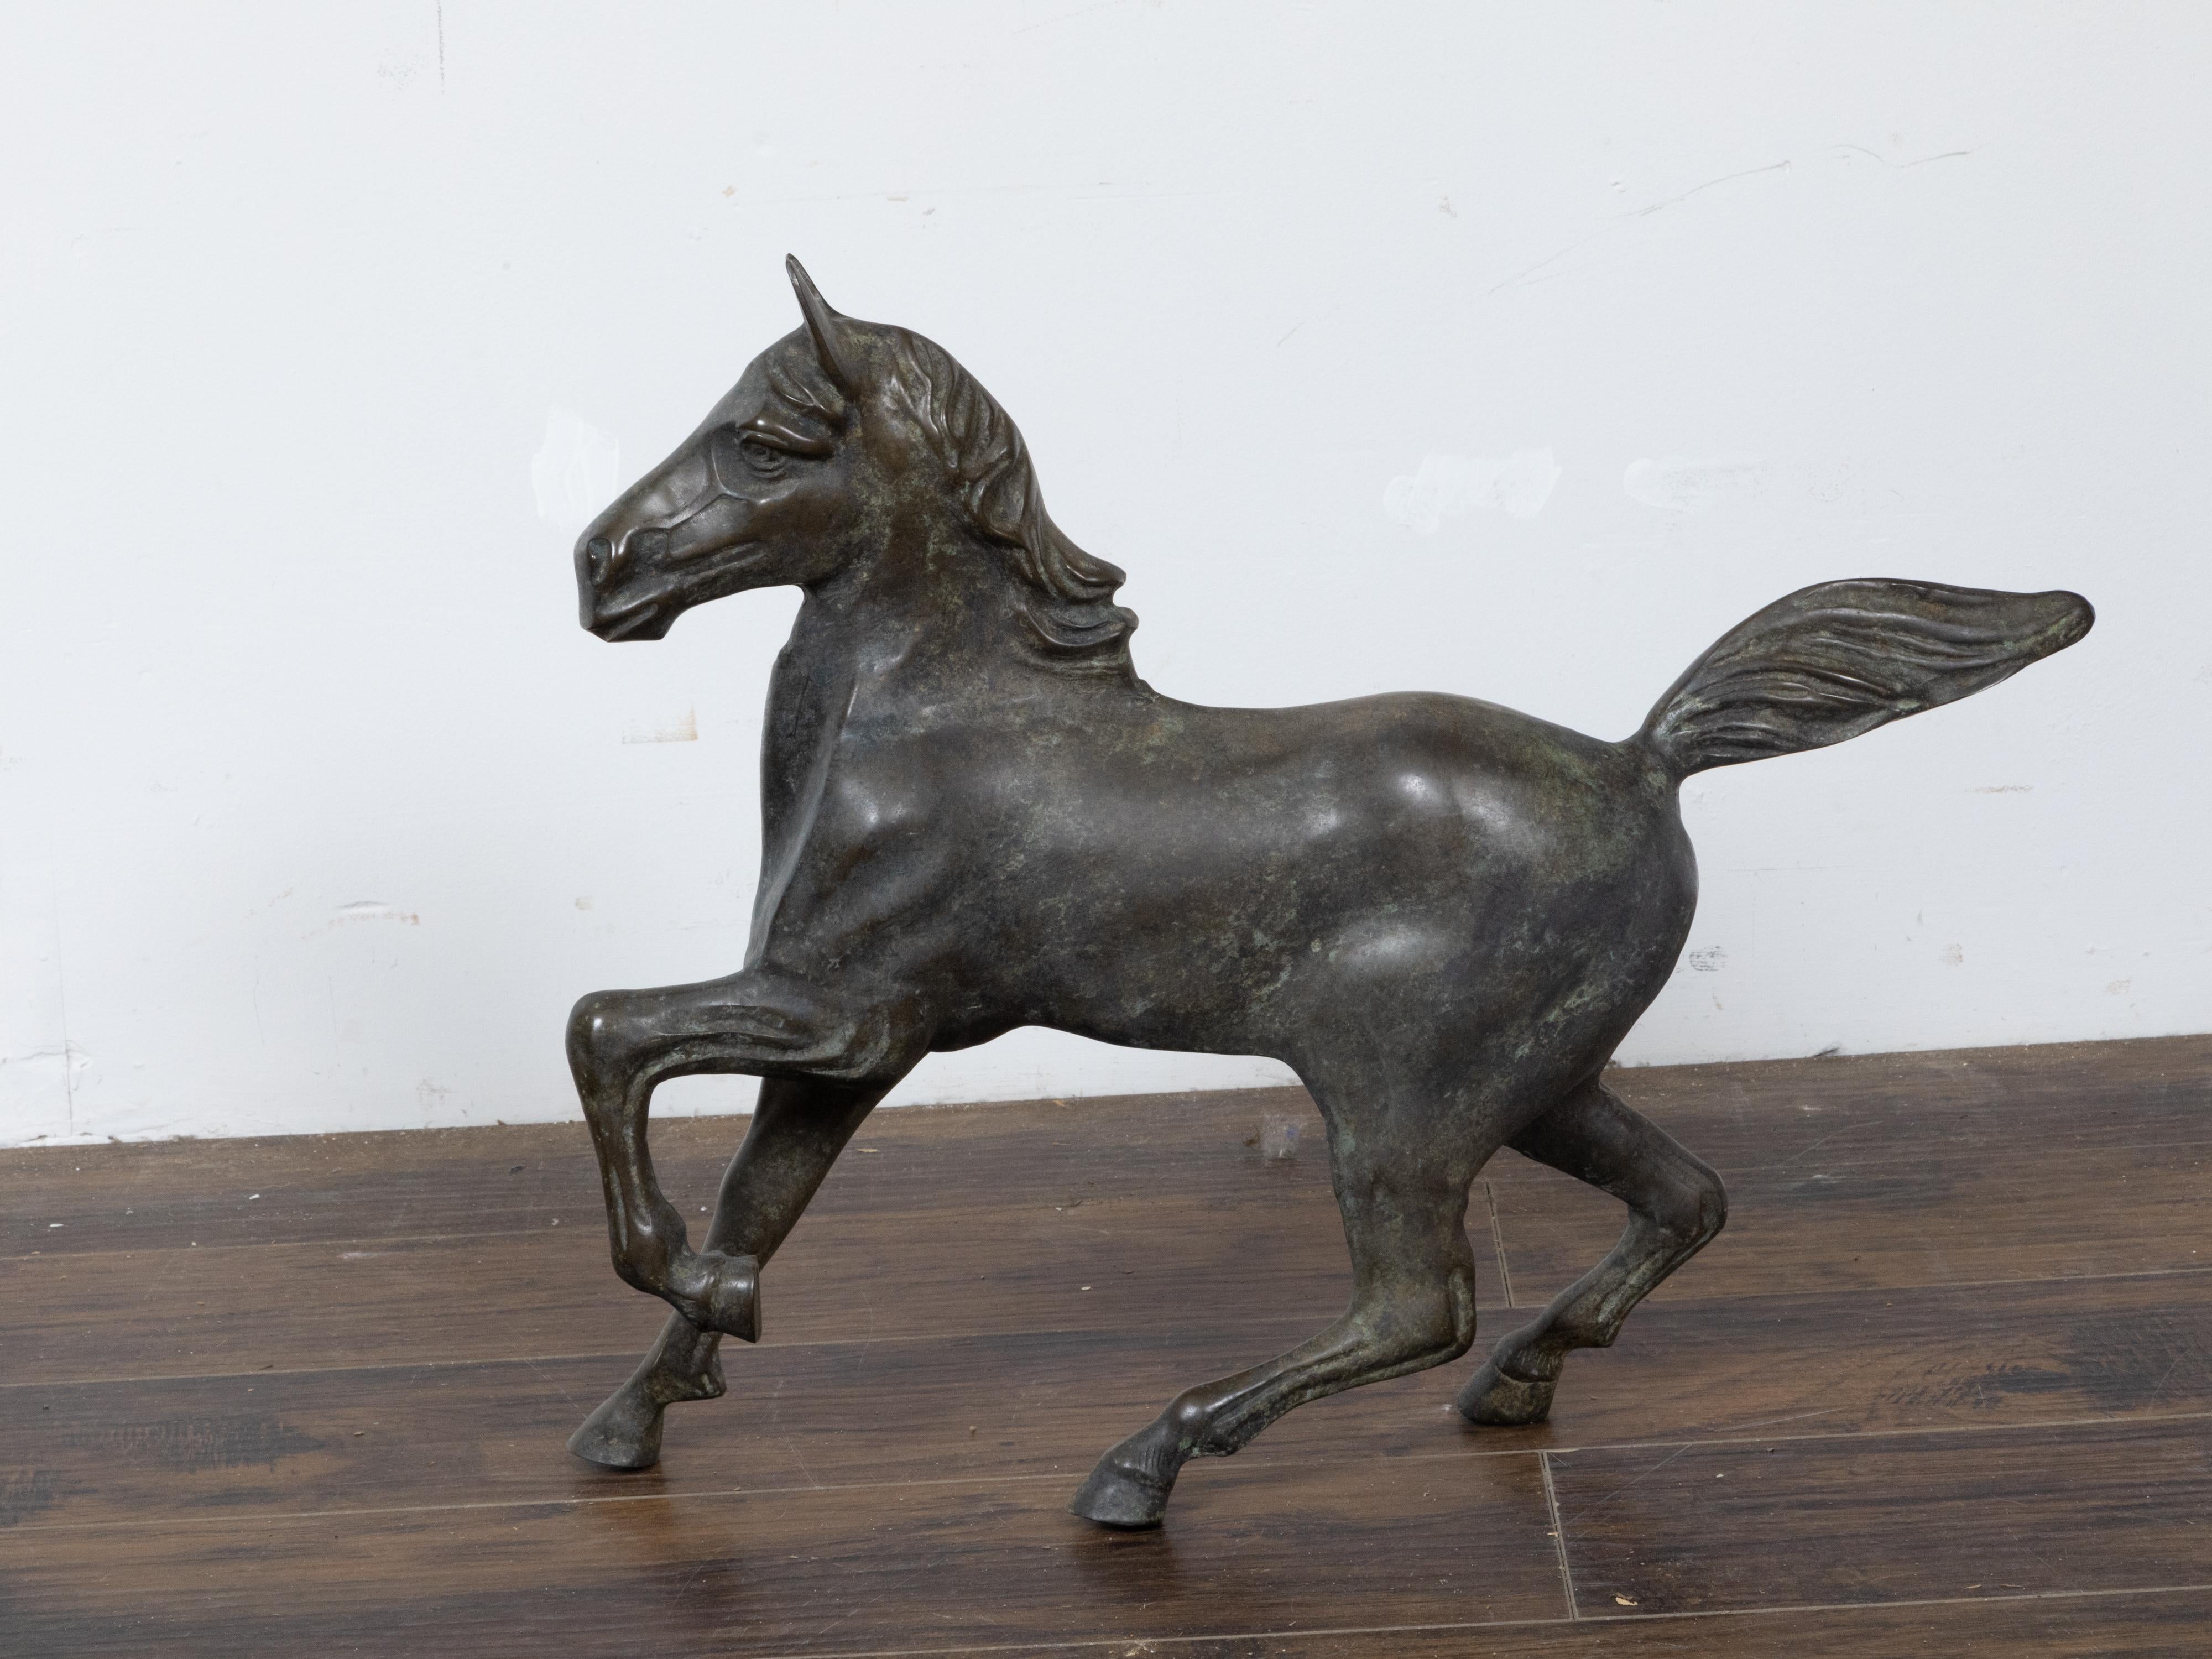 A small vintage bronze horse sculpture with dark patina and energetic pose. Discover the dynamic allure of this vintage bronze horse sculpture, a captivating piece that masterfully encapsulates the vigor and spirit of this majestic creature. Though